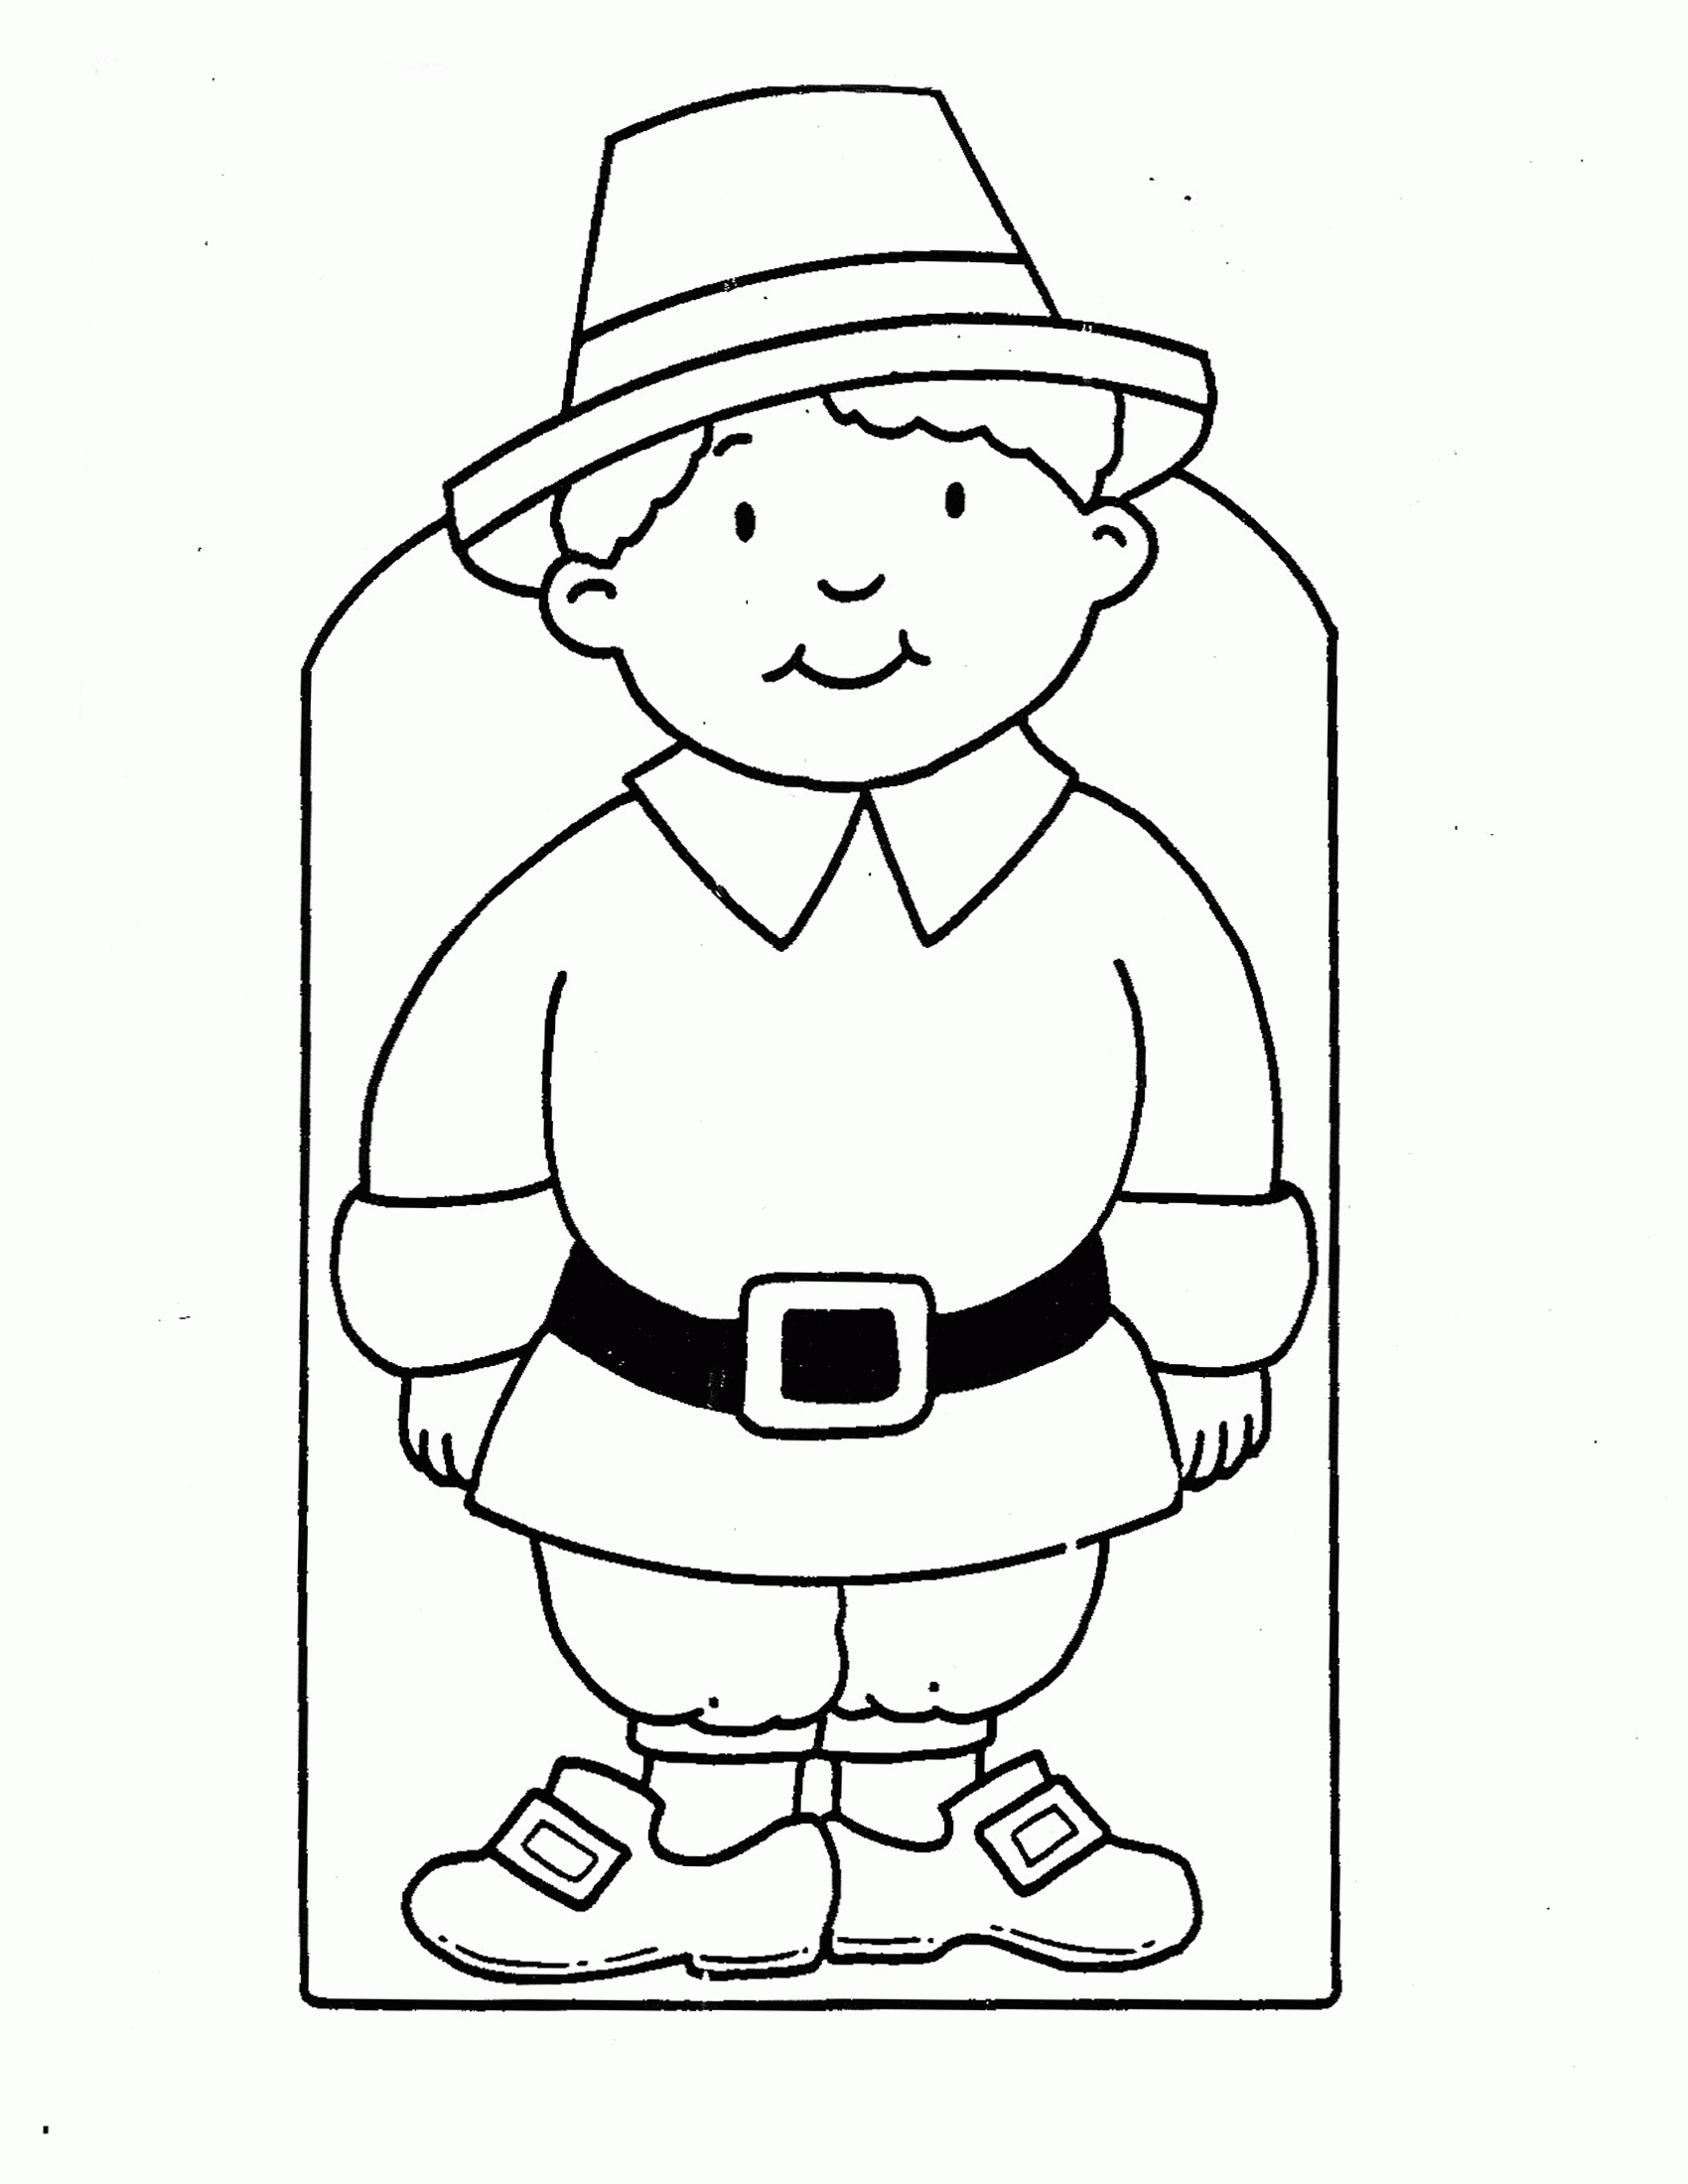 Pilgrim Coloring Pages Coloring Pages Of Pilgrims Coloring Home Pilgrim Color Pages